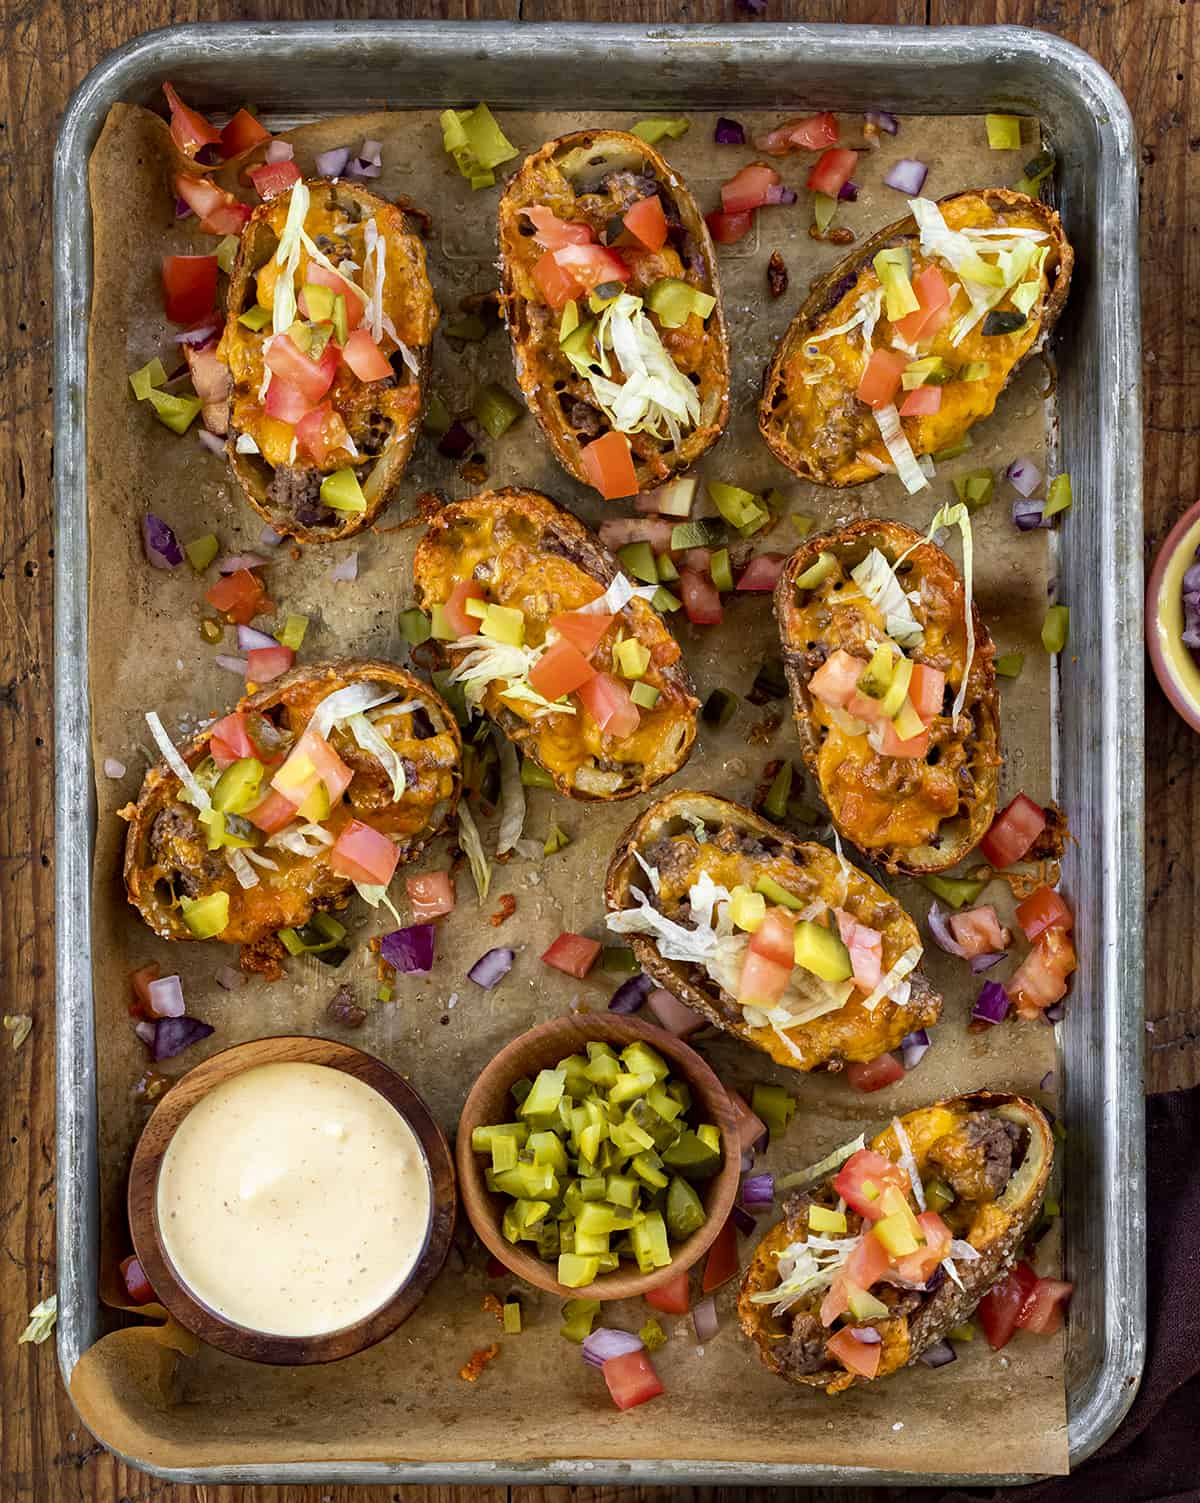 Cheeseburger Potato Skins in a Pan with Dipping Sauce and Chopped Pickles. Appetizer, Potato Skins, How to Make Potato Skins, Cheeseburger Potato Skins, Super Bowl Food, Game Day Appetizer, Hot Appetizer, i am homesteader, iamhomesteader